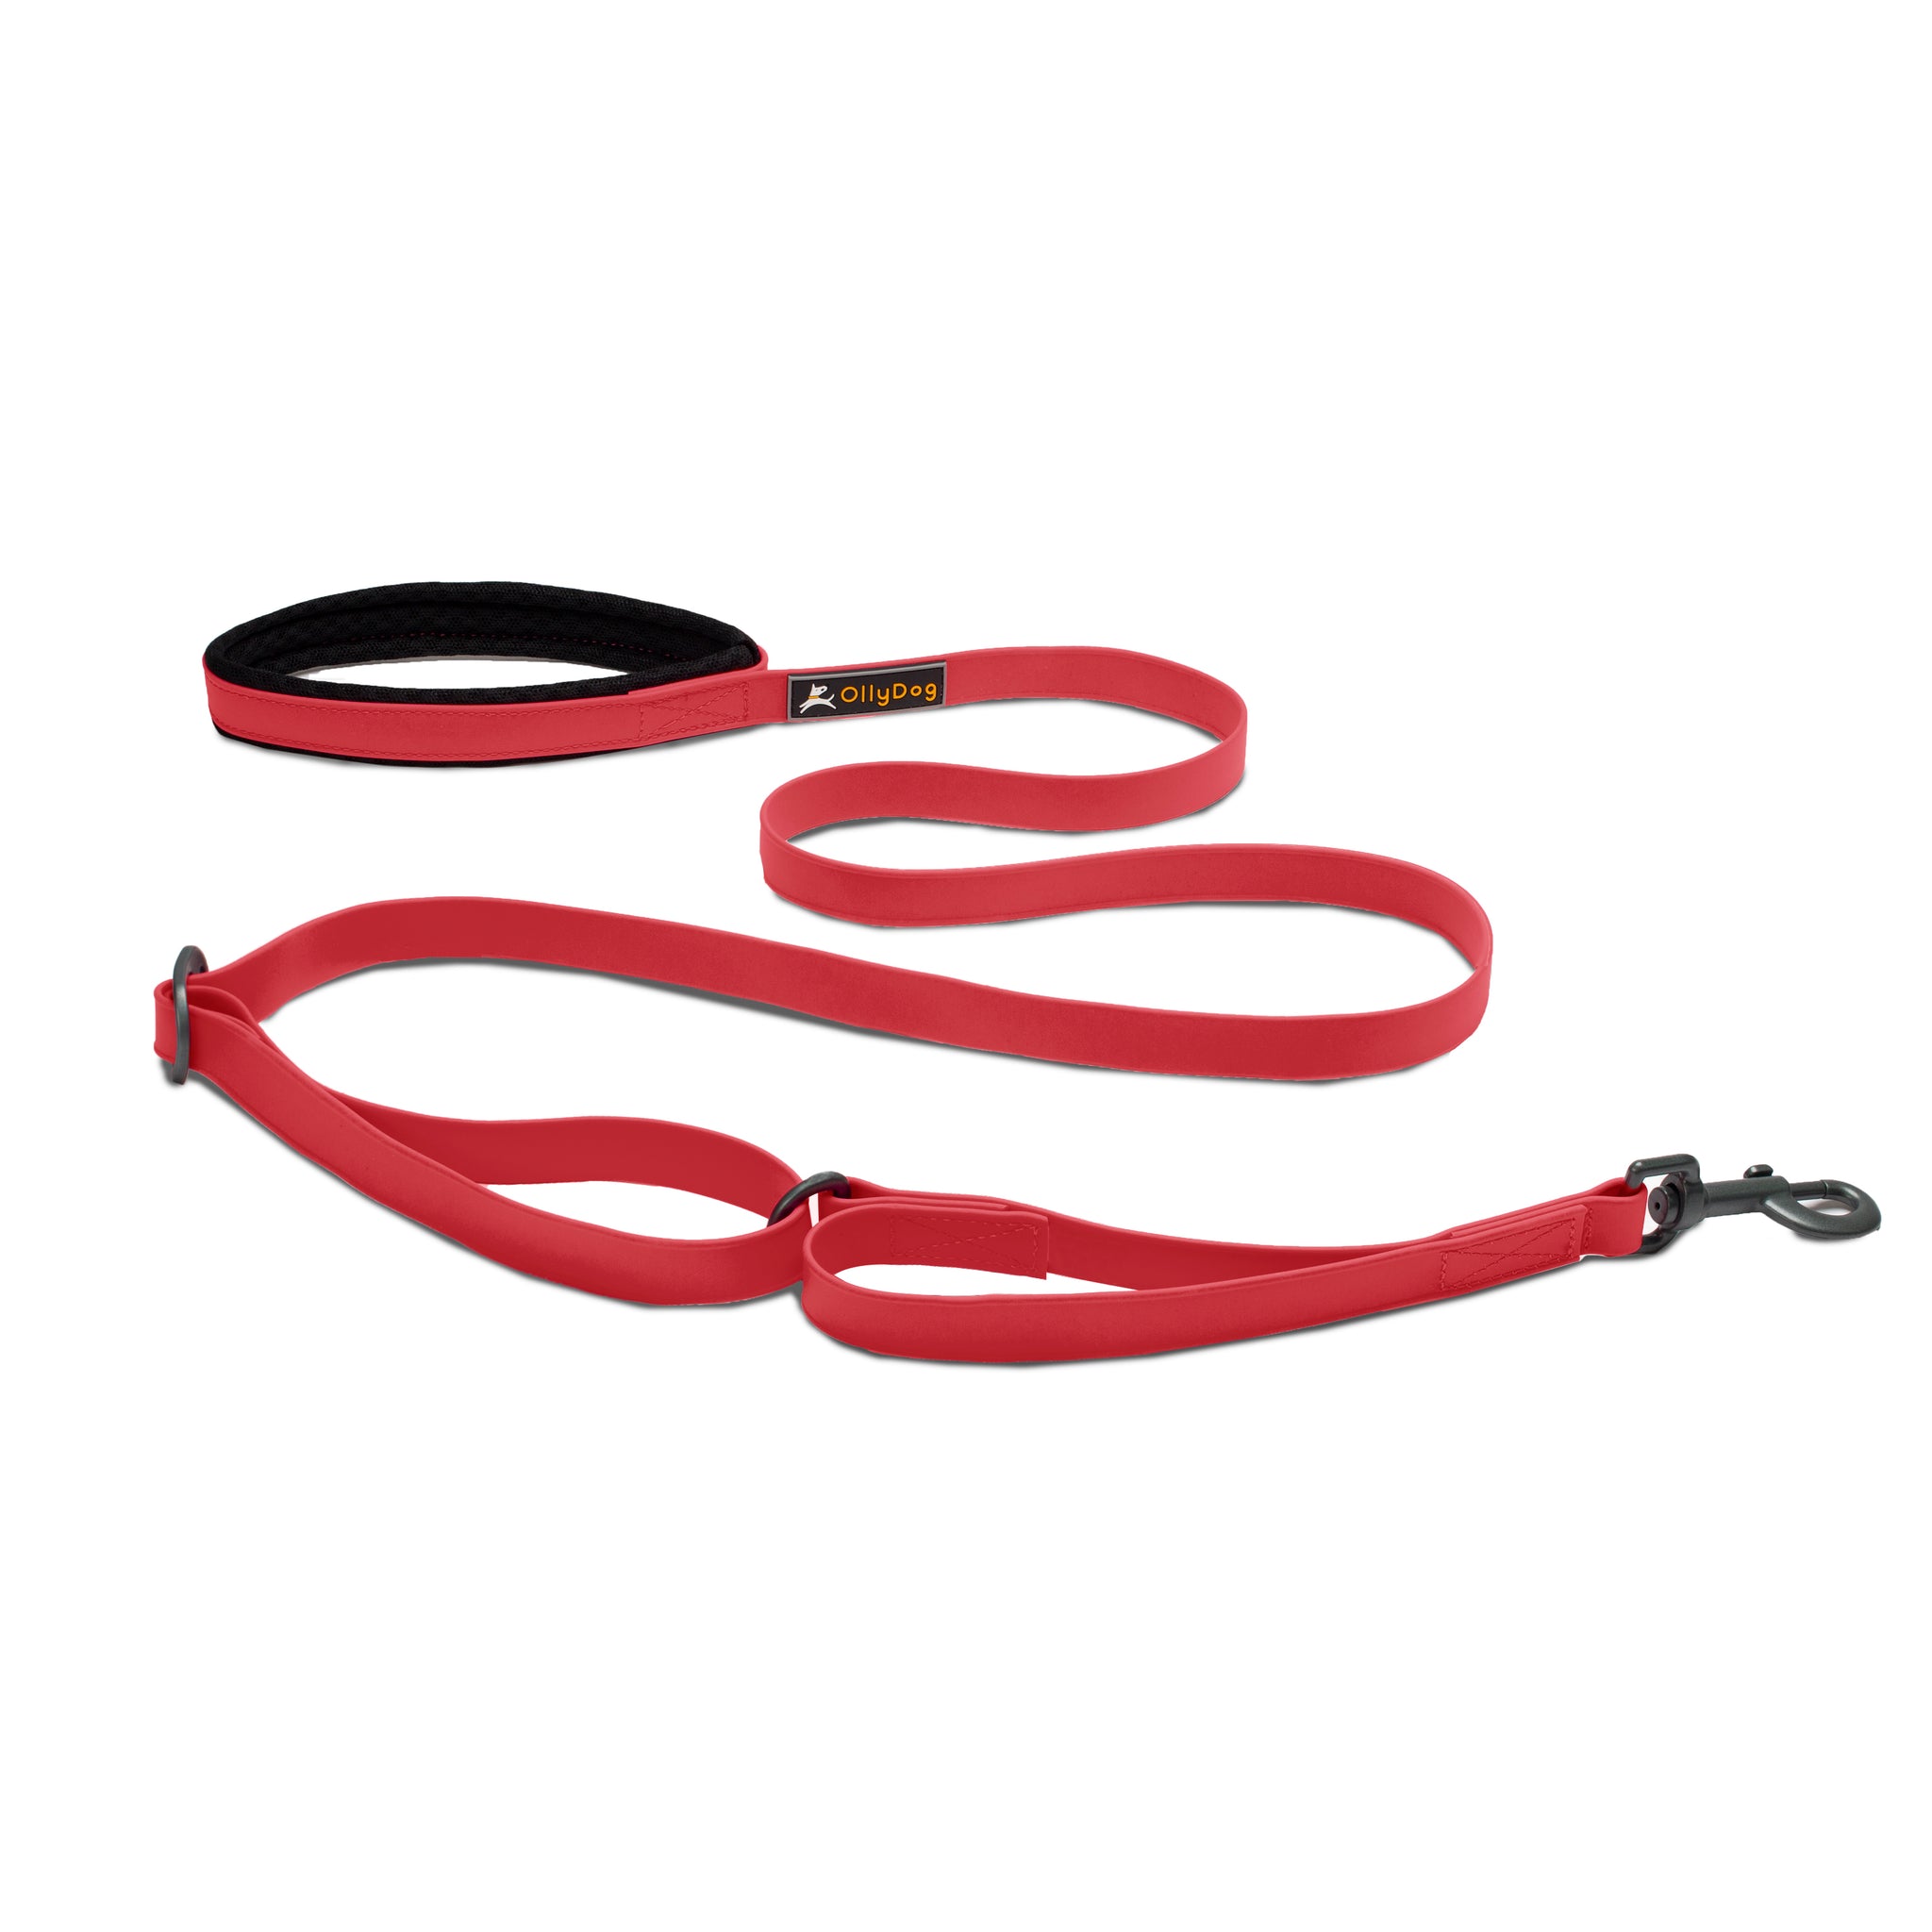 Tilden Waterproof Leash- Save 20% at Checkout